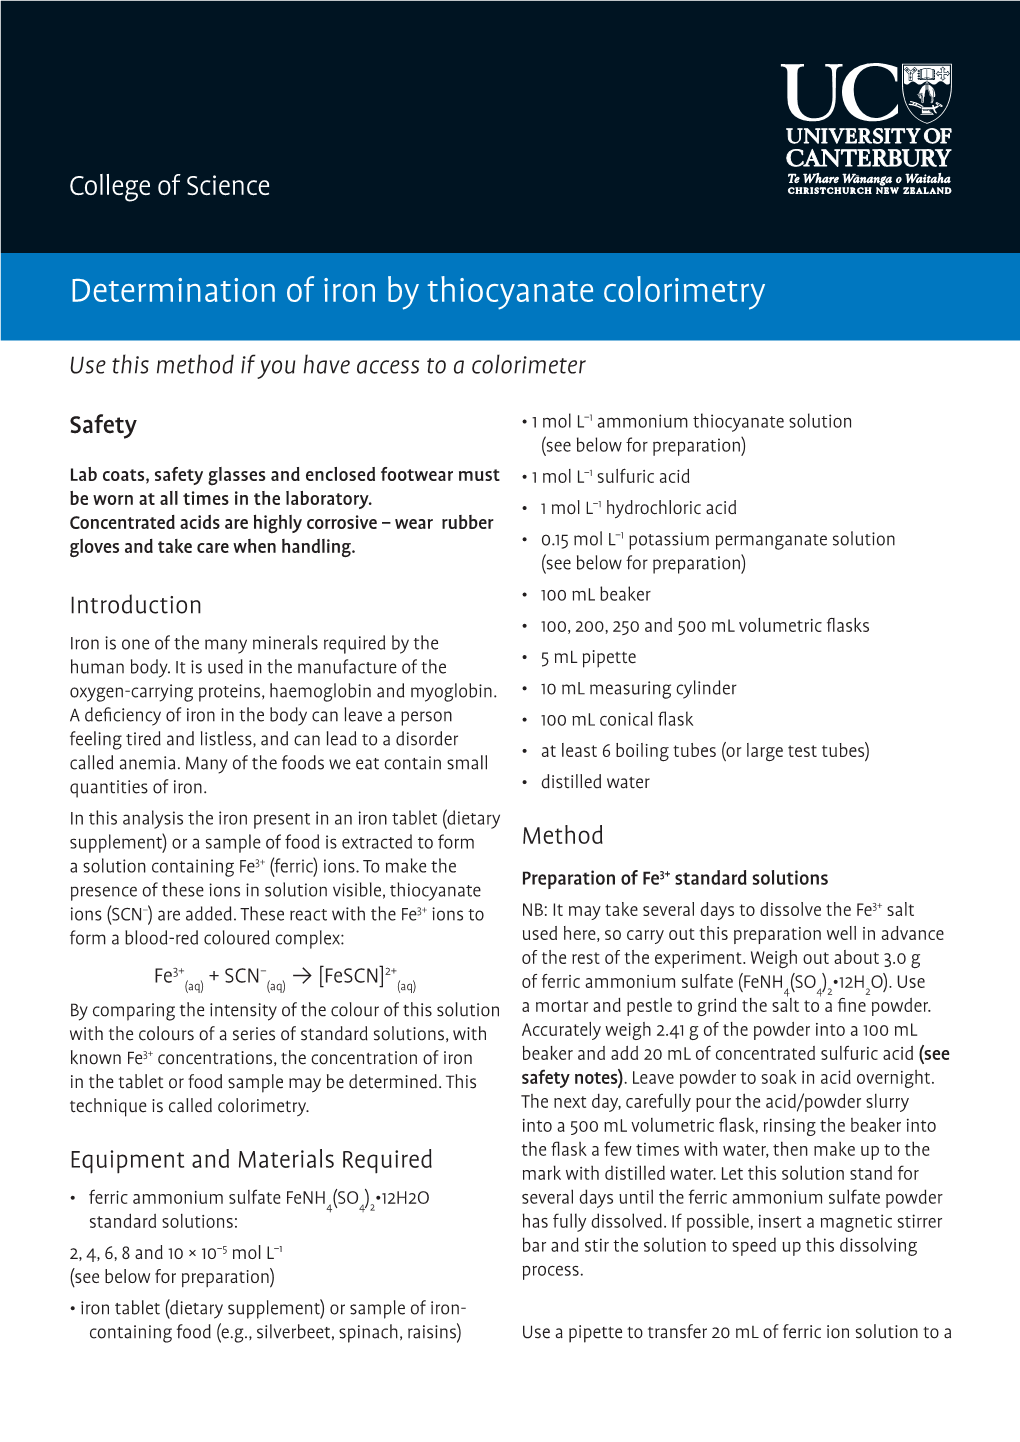 Determination of Iron by Thiocyanate Colorimetry